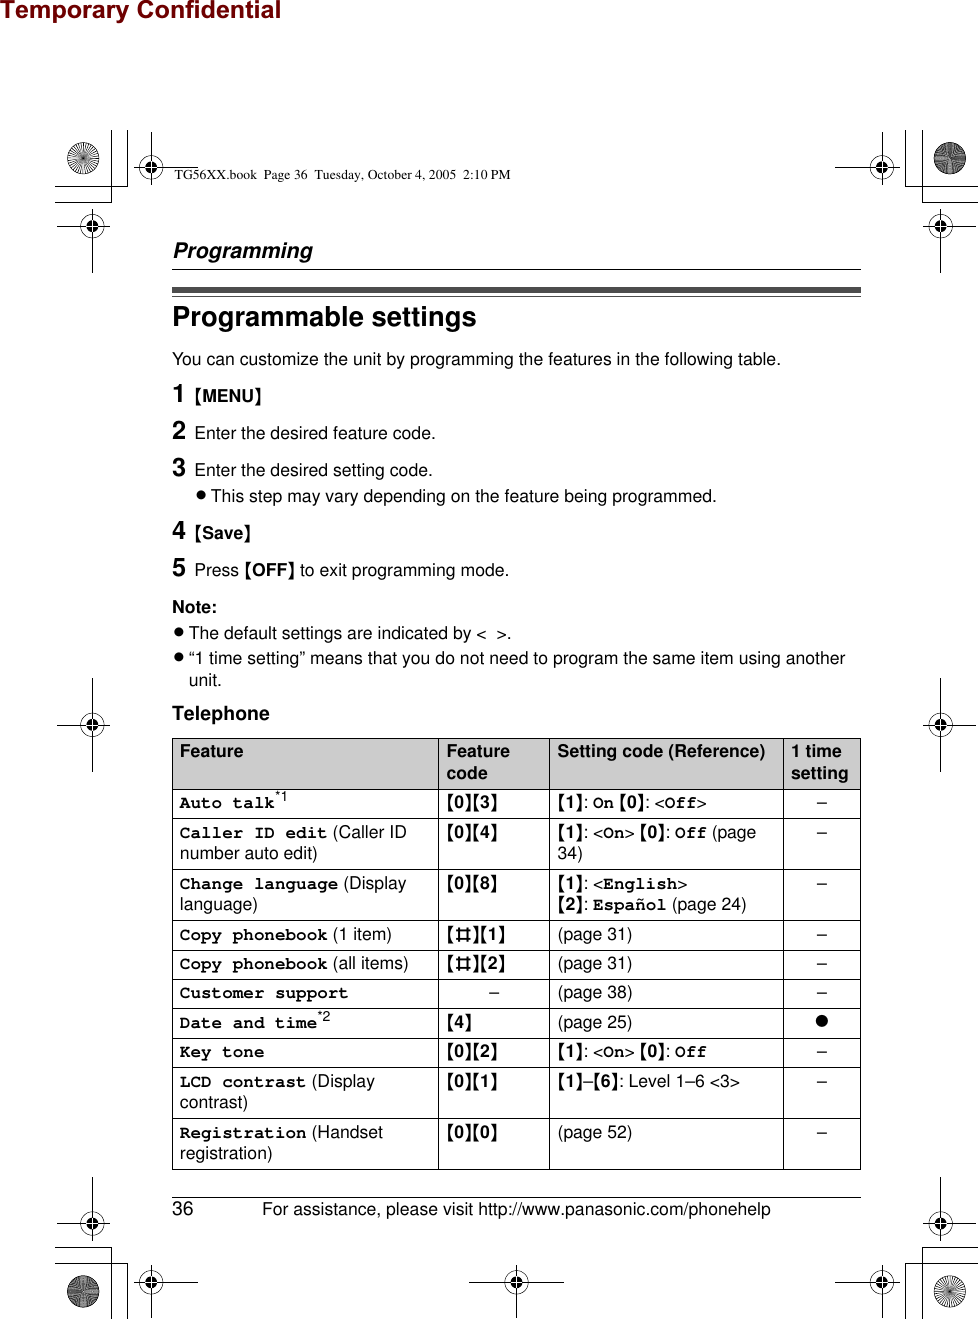 Temporary ConfidentialProgramming36 For assistance, please visit http://www.panasonic.com/phonehelpProgrammable settingsYou can customize the unit by programming the features in the following table.1{MENU}2Enter the desired feature code.3Enter the desired setting code.LThis step may vary depending on the feature being programmed.4{Save}5Press {OFF} to exit programming mode.Note:LThe default settings are indicated by &lt;  &gt;.L“1 time setting” means that you do not need to program the same item using another unit.TelephoneFeature Feature code Setting code (Reference) 1 time settingAuto talk*1 {0}{3}{1}: On {0}: &lt;Off&gt;–Caller ID edit (Caller ID number auto edit){0}{4}{1}: &lt;On&gt; {0}: Off (page 34) –Change language (Display language){0}{8}{1}: &lt;English&gt;{2}: Español (page 24) –Copy phonebook (1 item) {#}{1}(page 31) –Copy phonebook (all items) {#}{2}(page 31) –Customer support – (page 38) –Date and time*2 {4}(page 25) rKey tone {0}{2}{1}: &lt;On&gt; {0}: Off –LCD contrast (Display contrast){0}{1}{1}–{6}: Level 1–6 &lt;3&gt; –Registration (Handset registration){0}{0}(page 52) –TG56XX.book  Page 36  Tuesday, October 4, 2005  2:10 PM